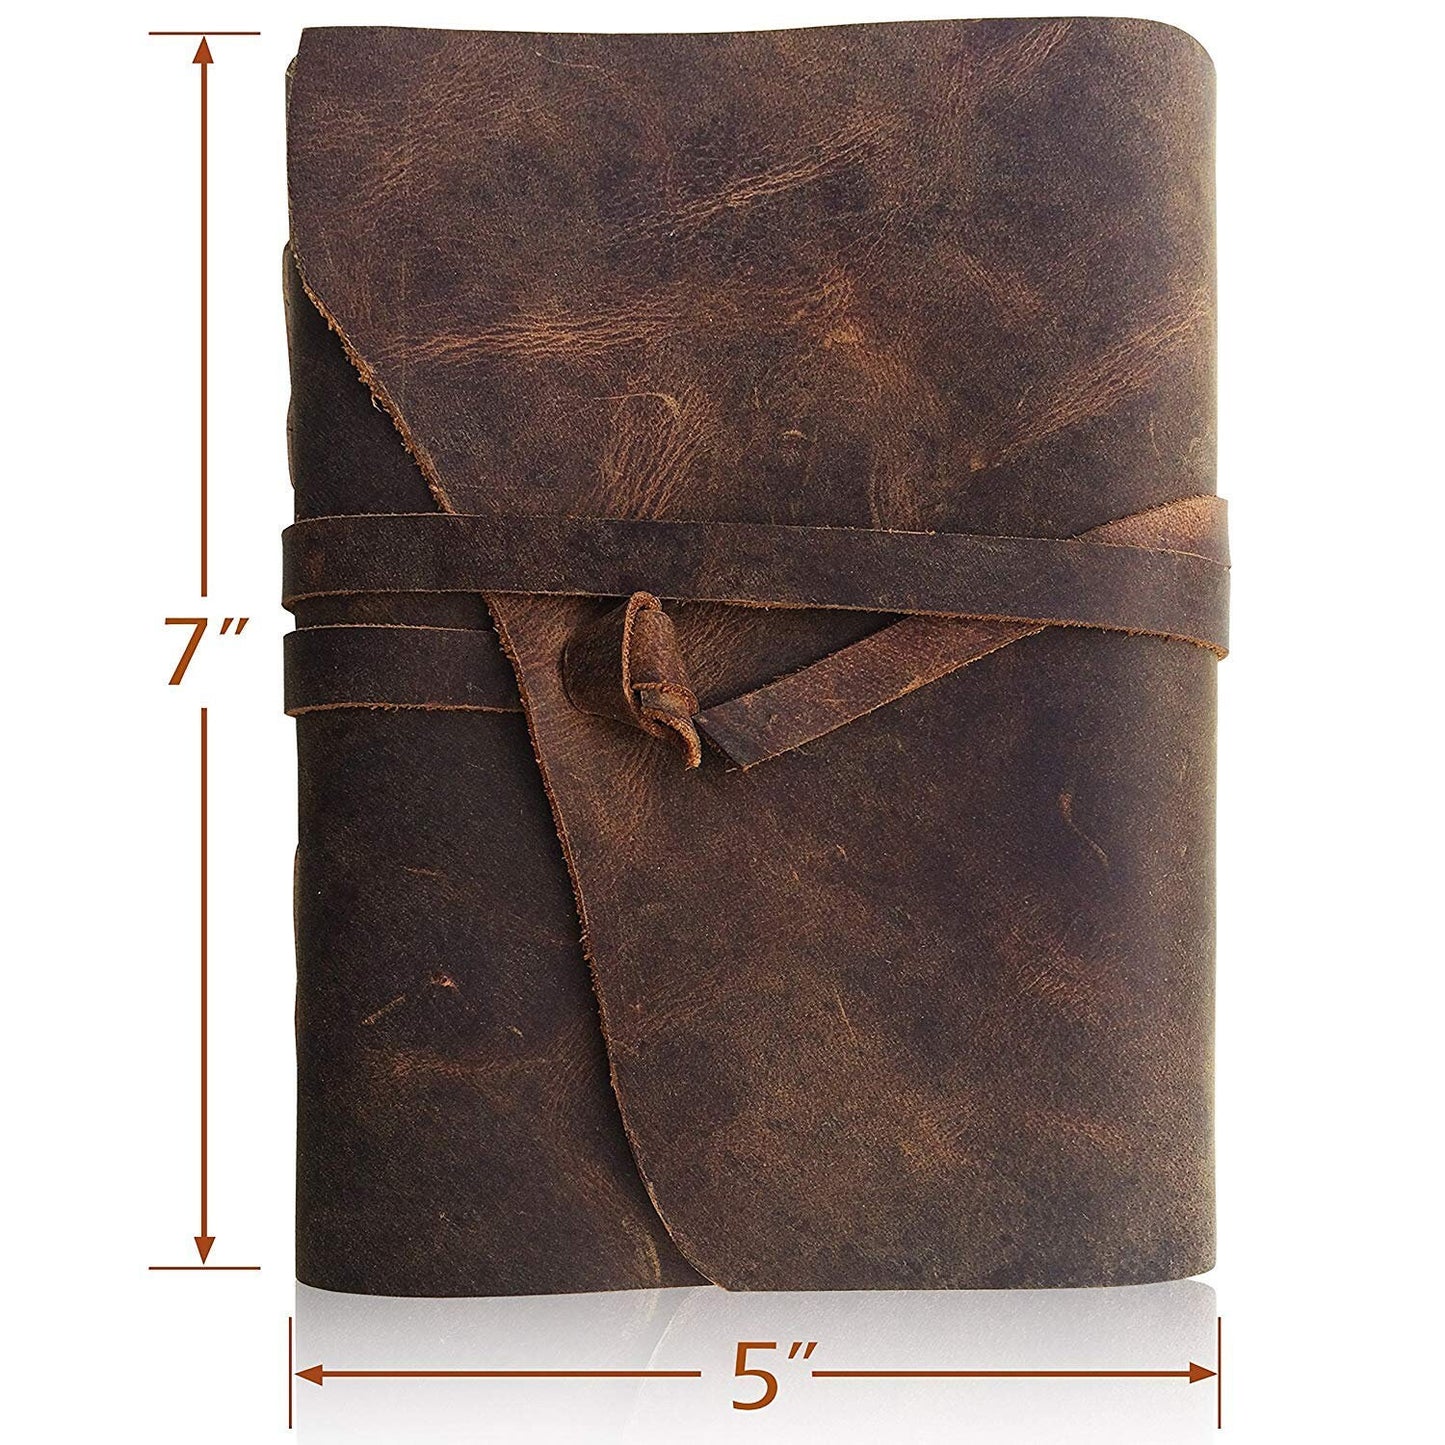 Genuine Hunter Leather Journal Notebook Diary Travel Notebook Travel Diary Vintage Notebook Retro Look Notebook Christmas Gift for Him